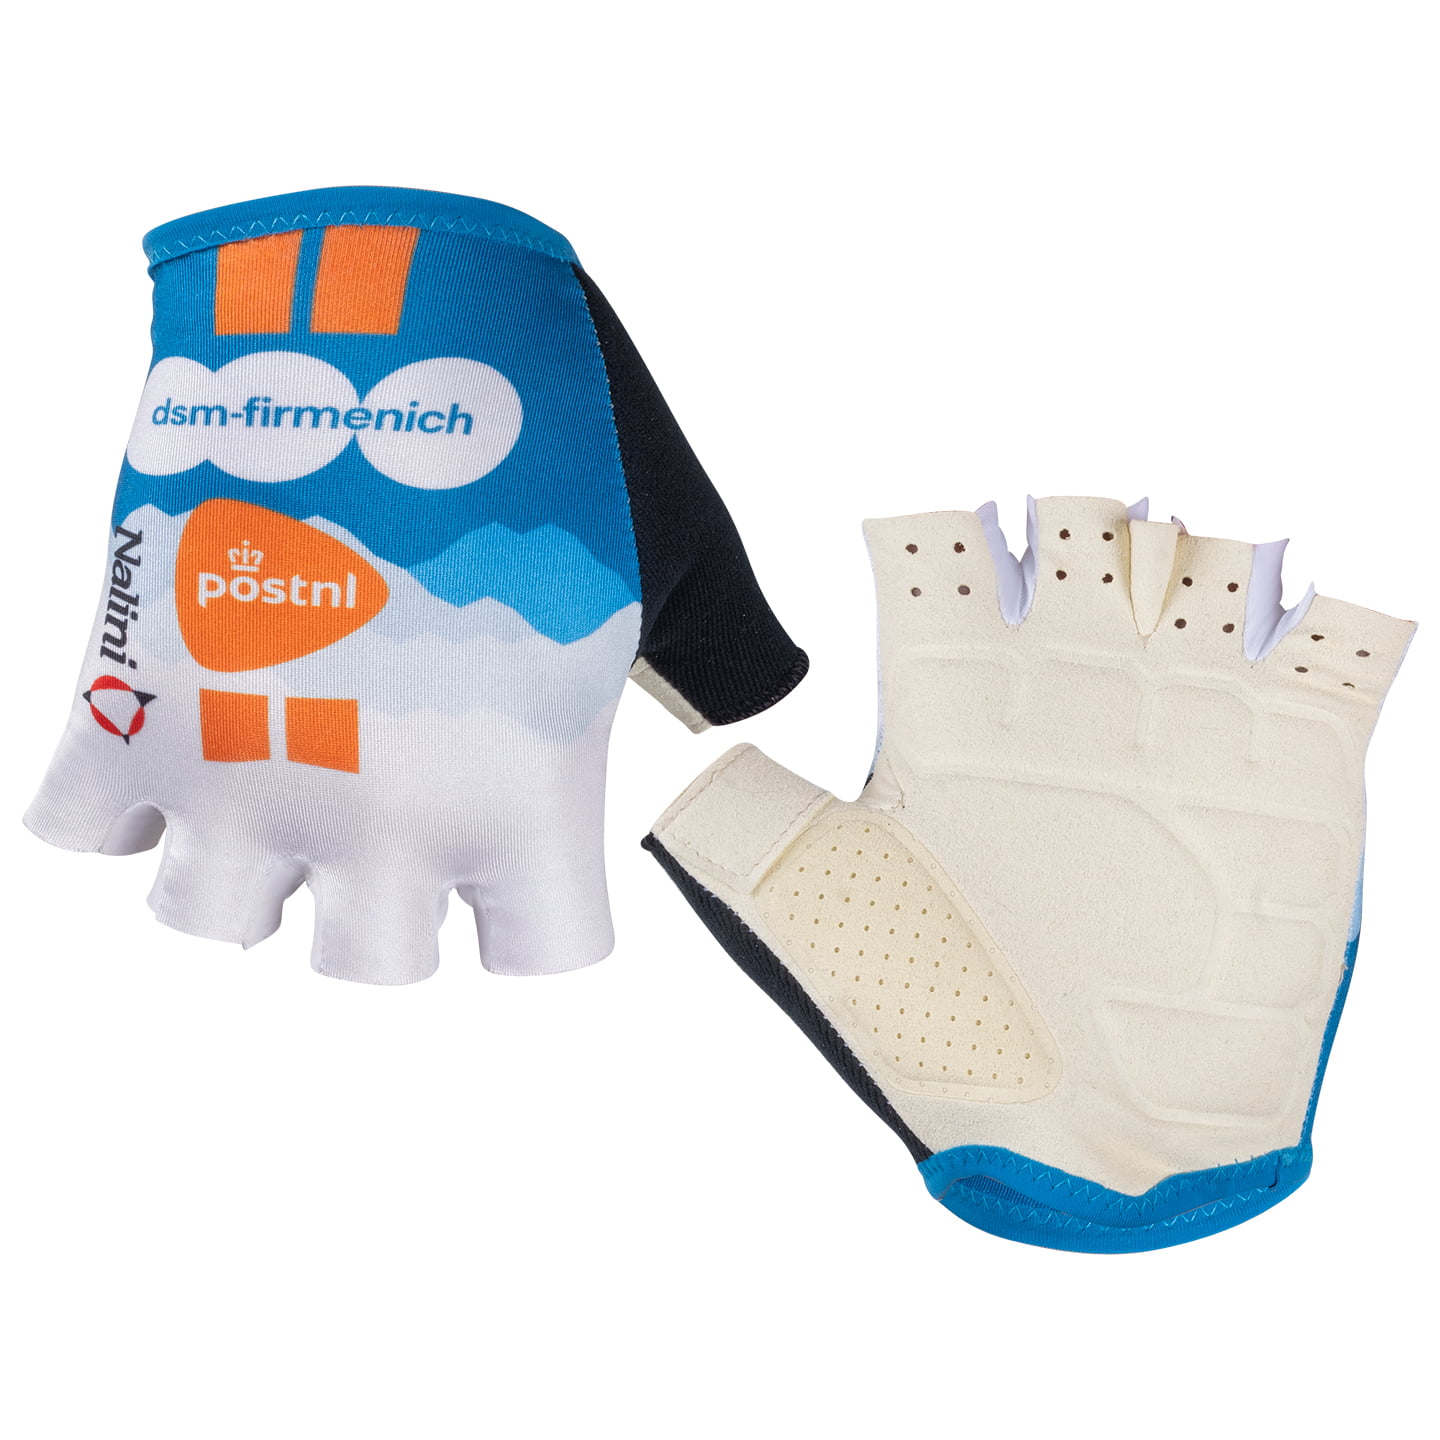 TEAM dsm-firmenich-PostNL 2024 Cycling Gloves, for men, size 2XL, Cycling gloves, Cycle clothing